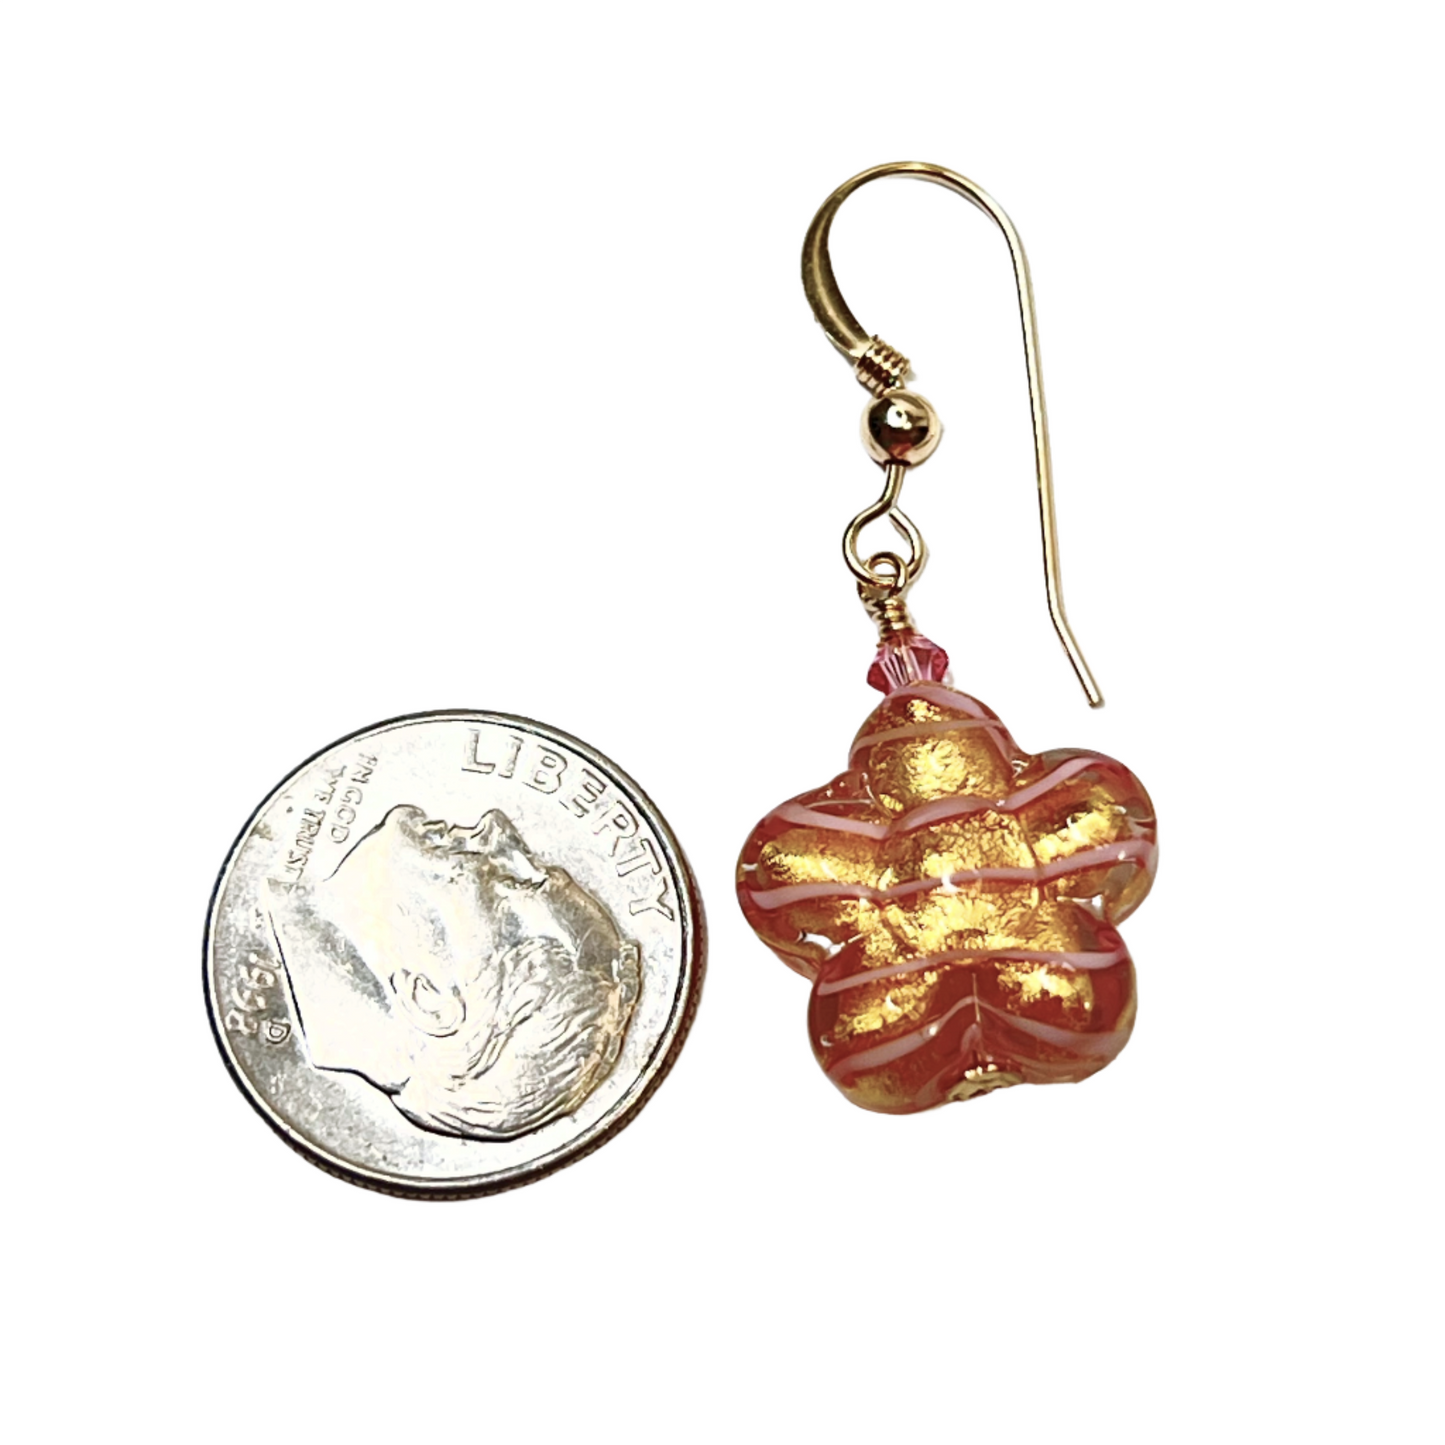 a pair of red and gold earrings next to a penny